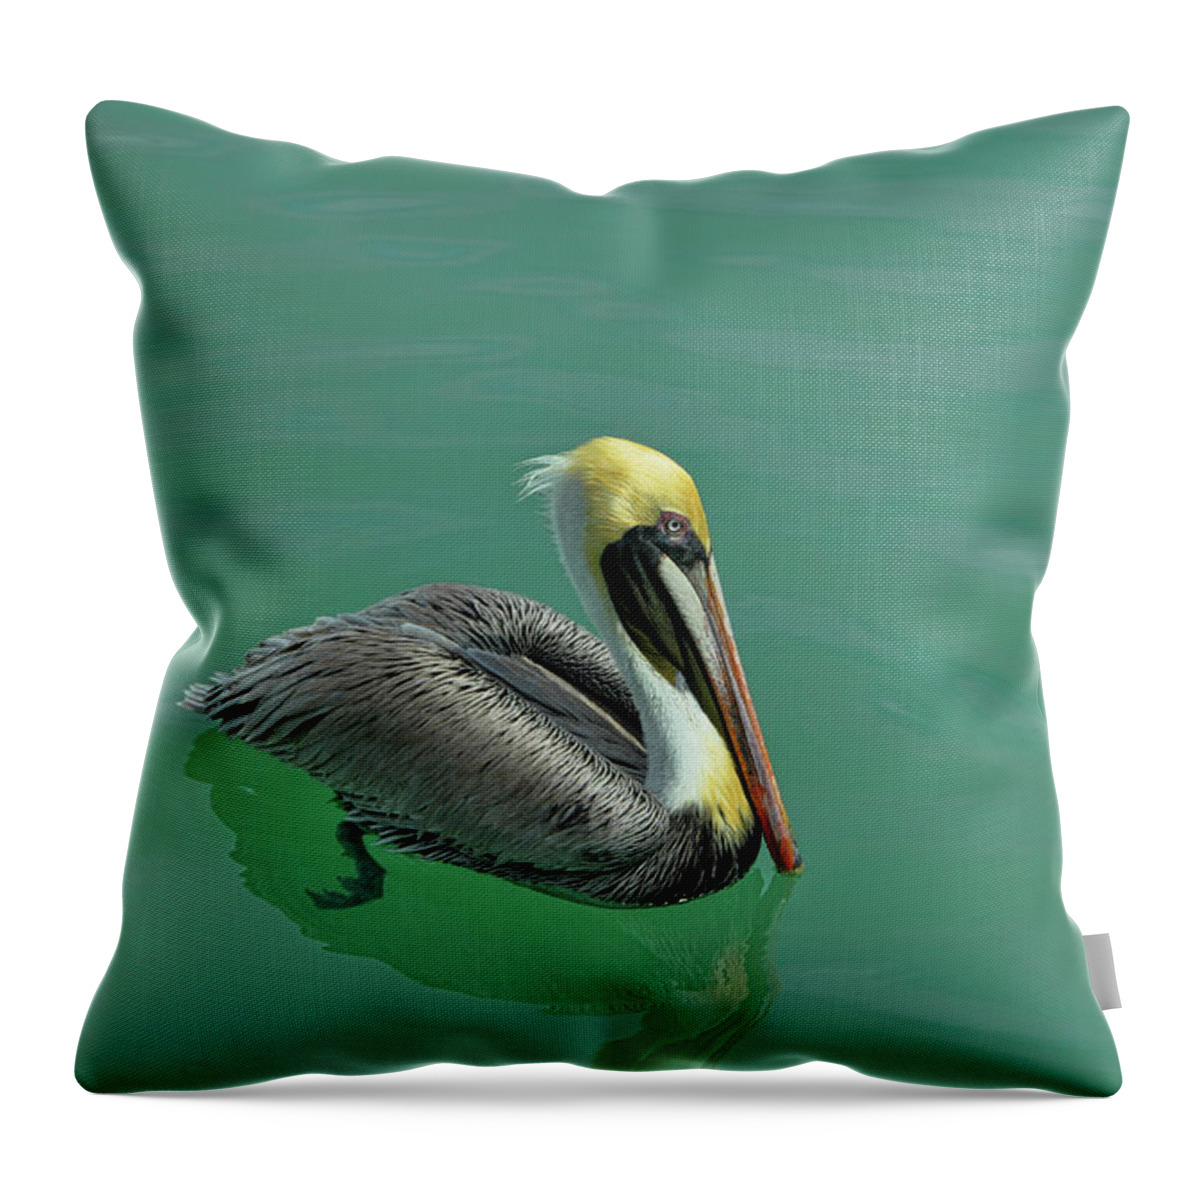 Archipelago Throw Pillow featuring the photograph Petros Cousin by JAMART Photography